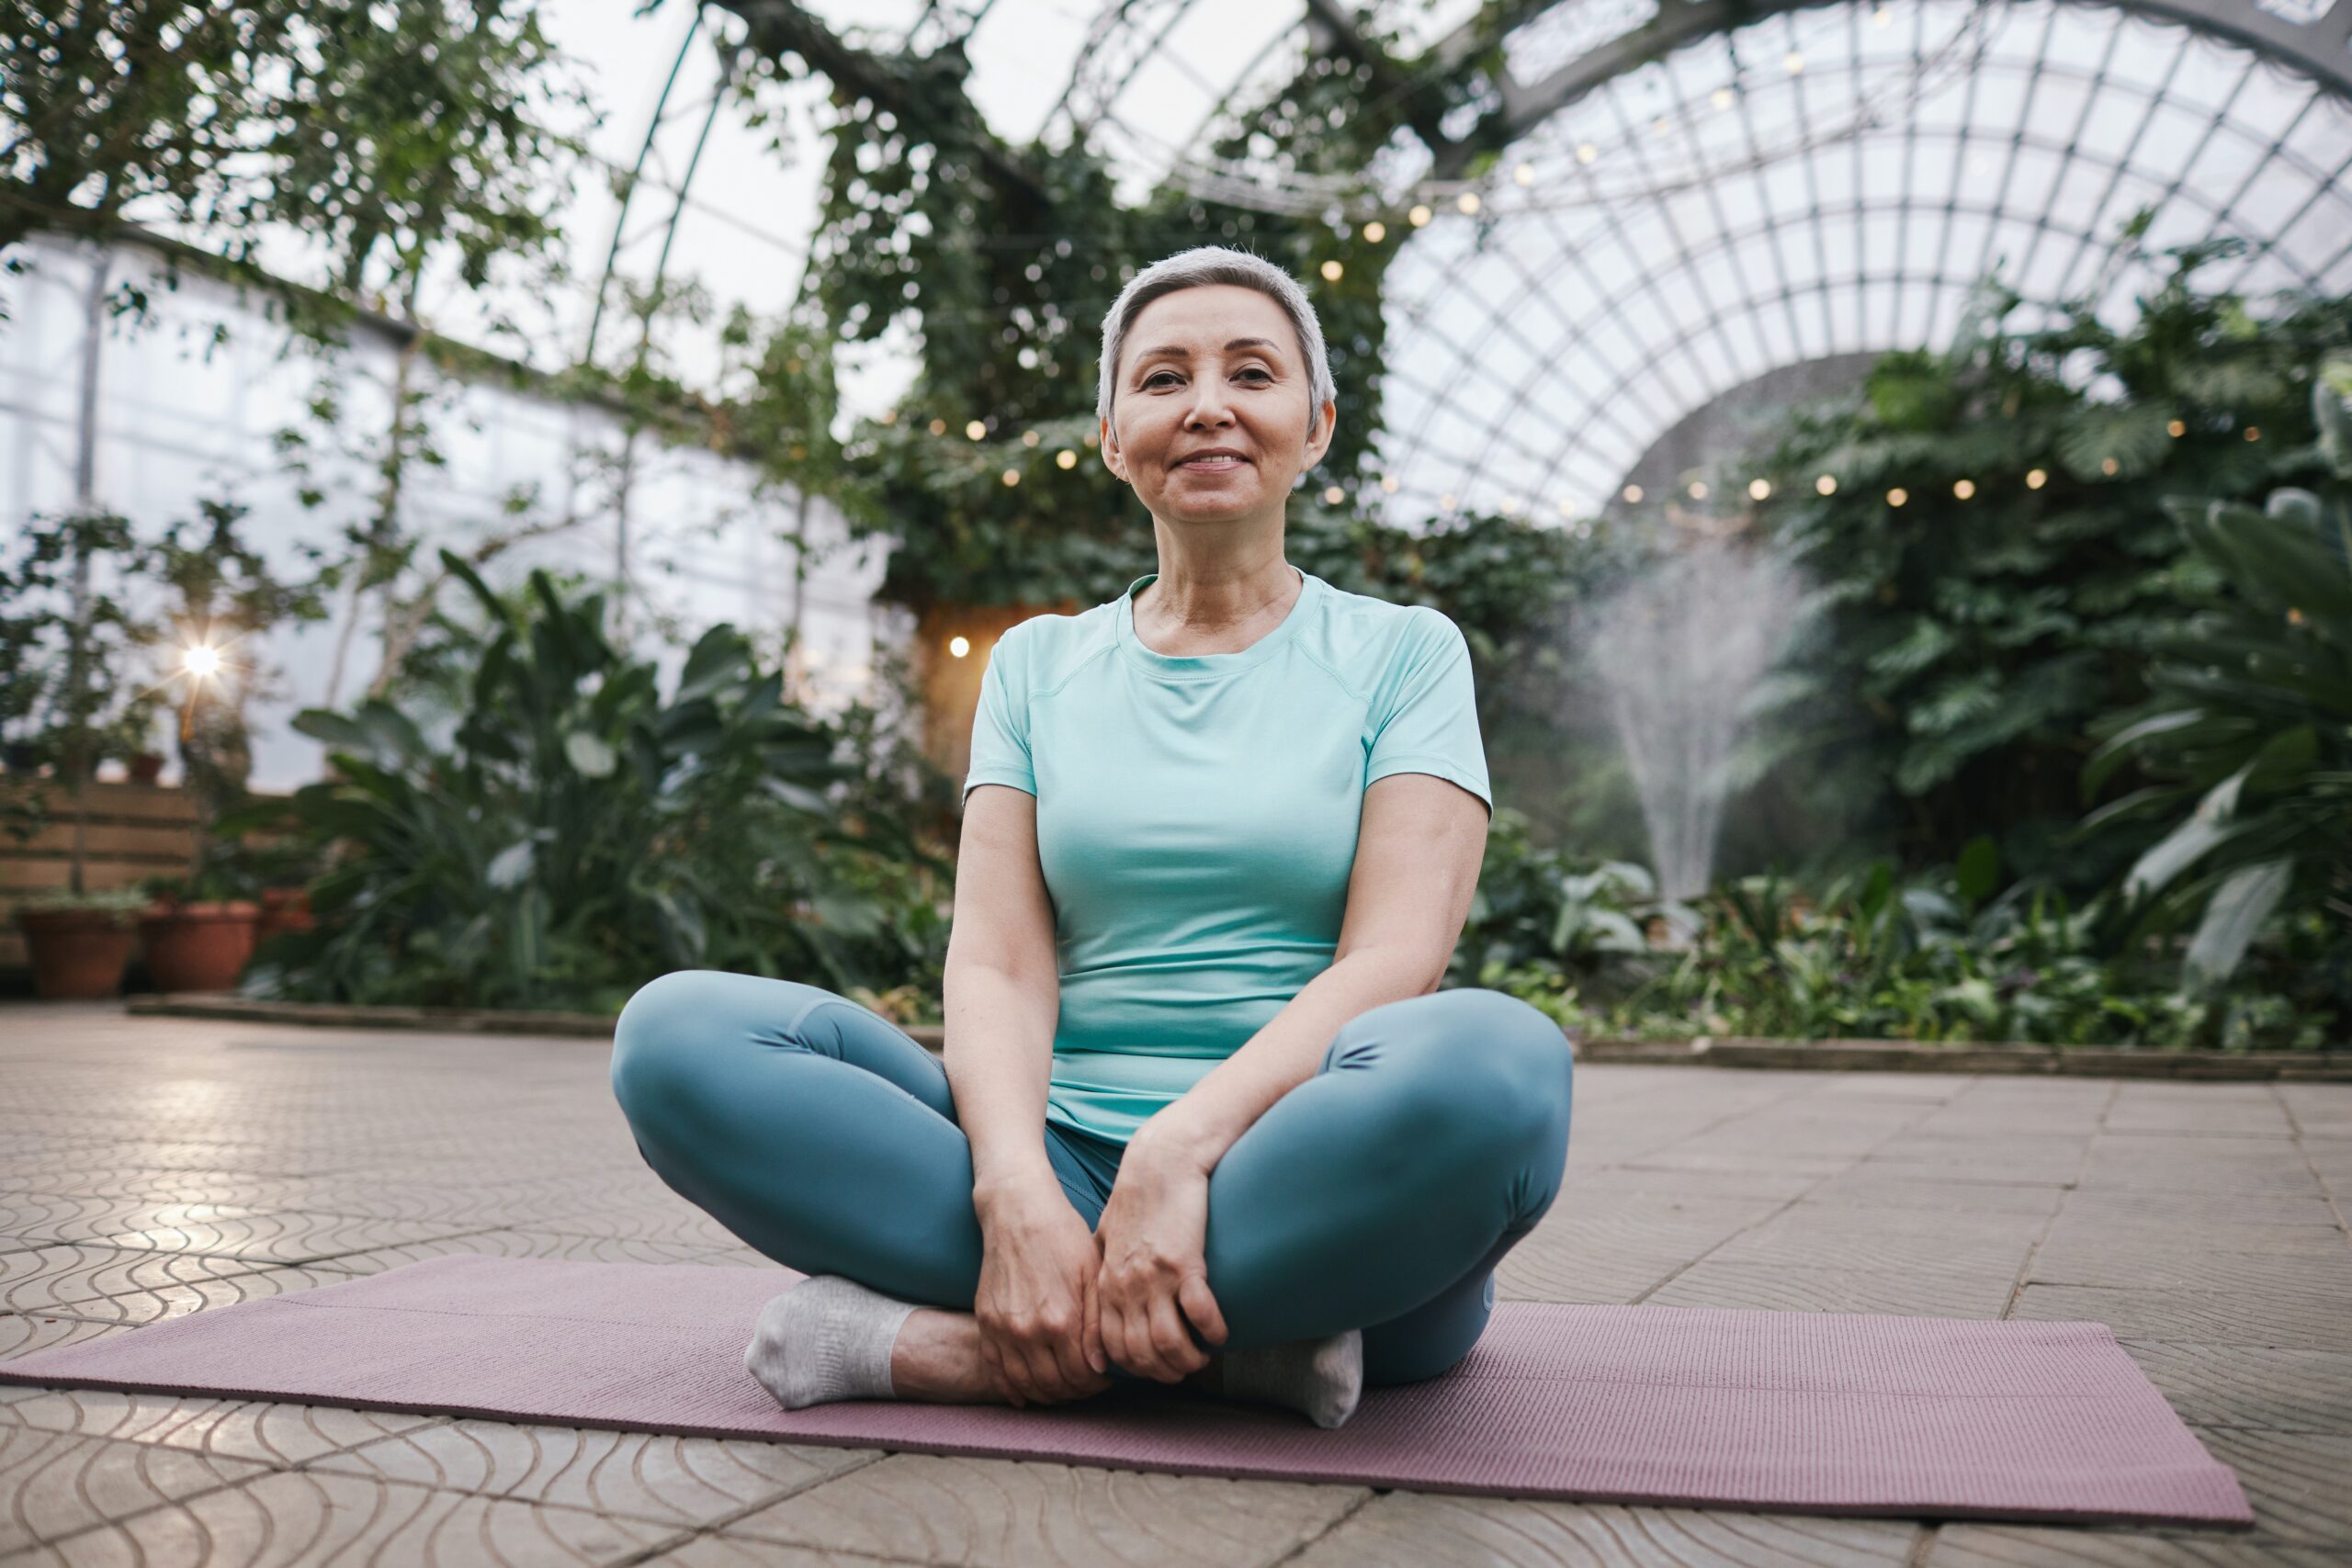 Middle-aged woman with short, white hair, sitting on a yoga mat in a atrium with blue yoga pants and blue shirt.